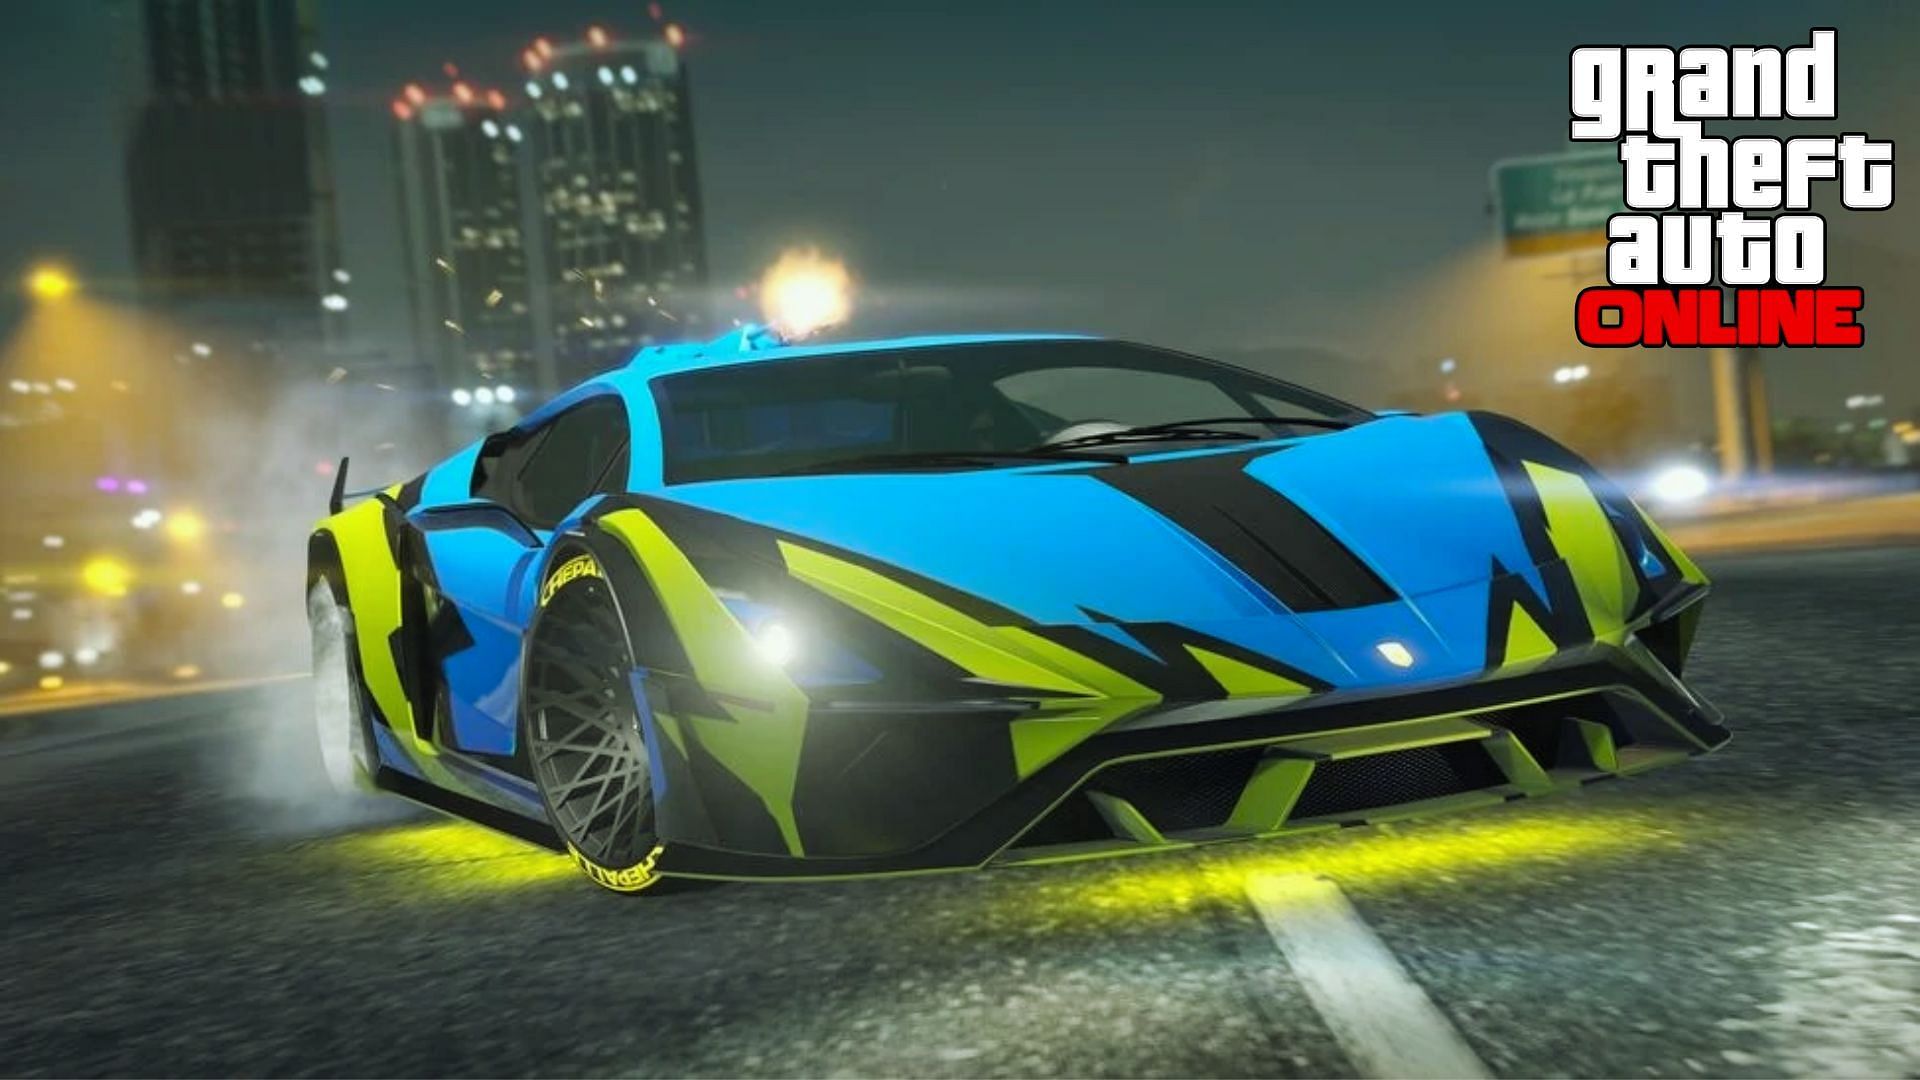 The HSW Weaponized Ignus in its full glory in GTA Online (Image via Rockstar Games)